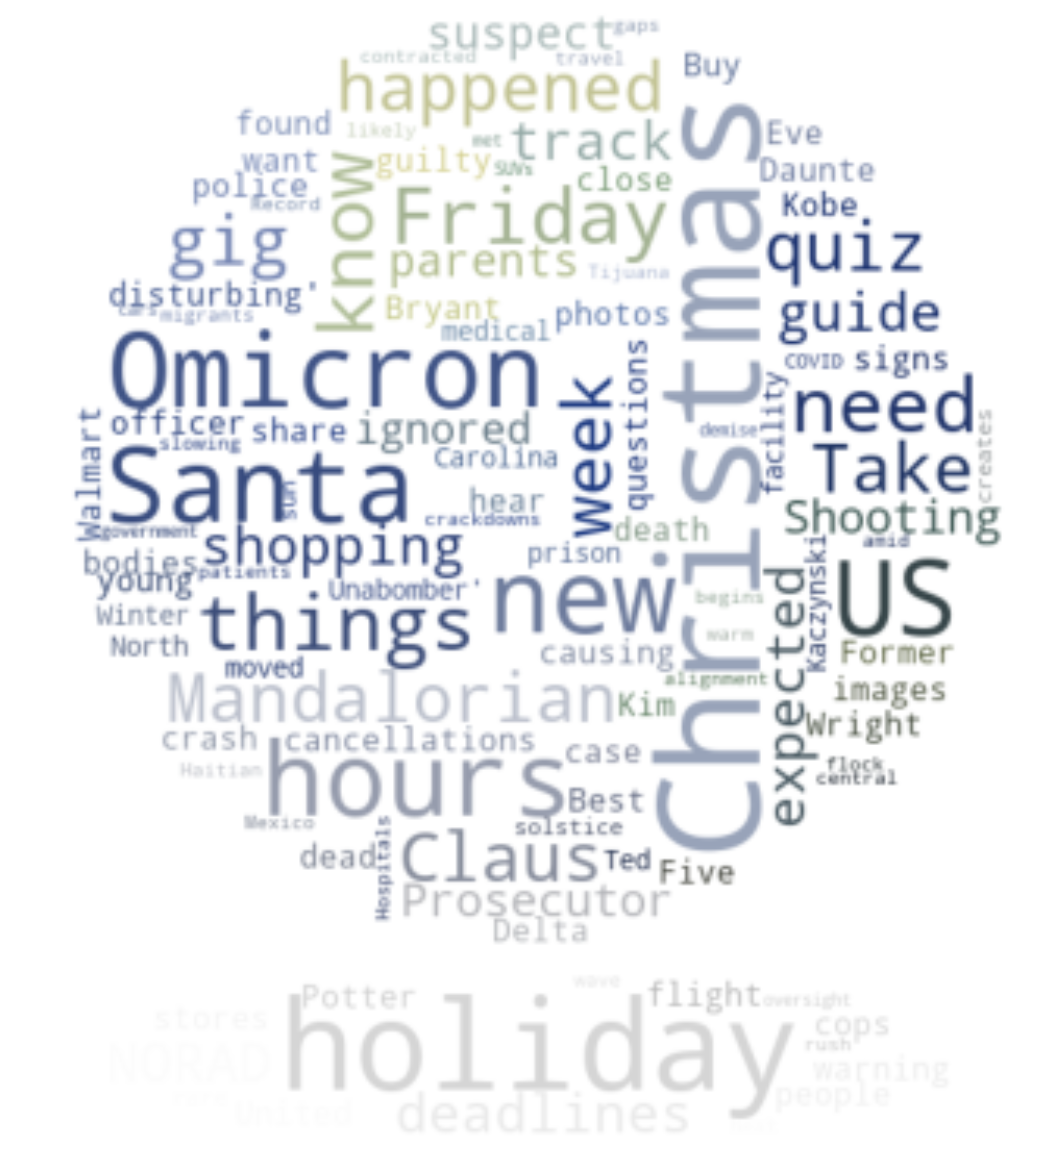 Scrape an online newspaper and display the hot topics in a Word Cloud  -Python | by Joséphine Picot | Medium